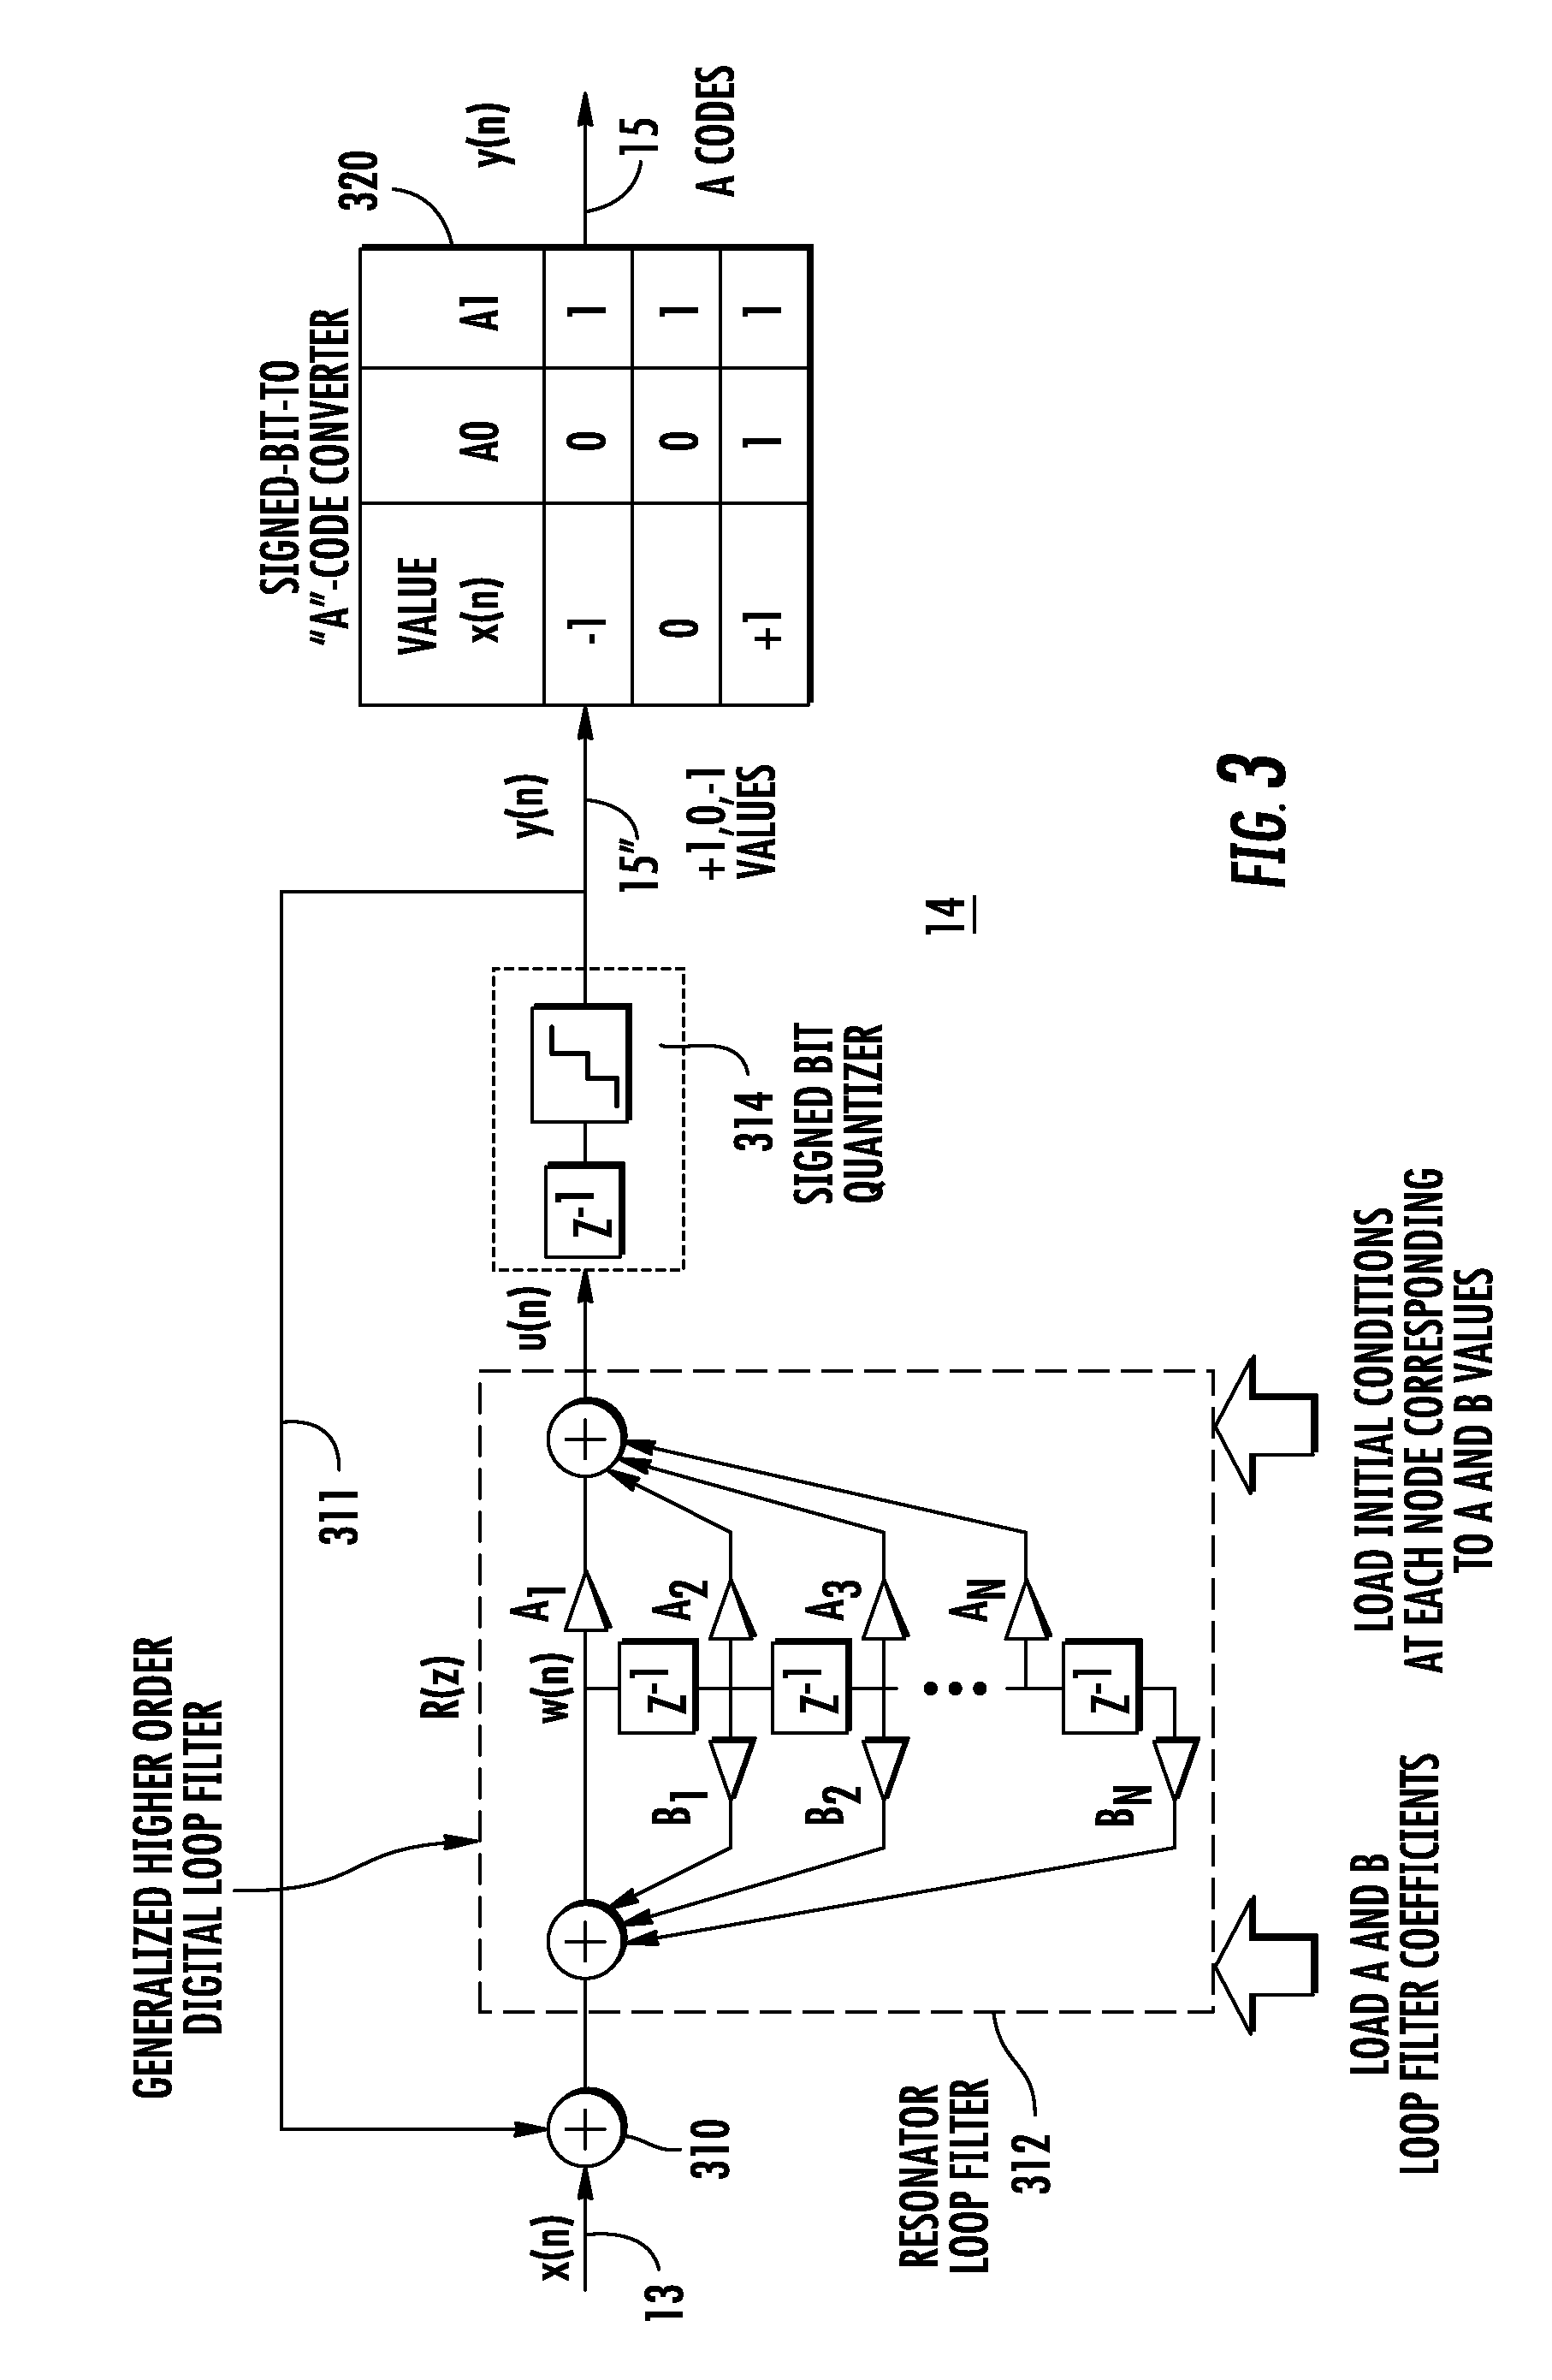 Direct radio frequency generation using power digital-to-analog conversion